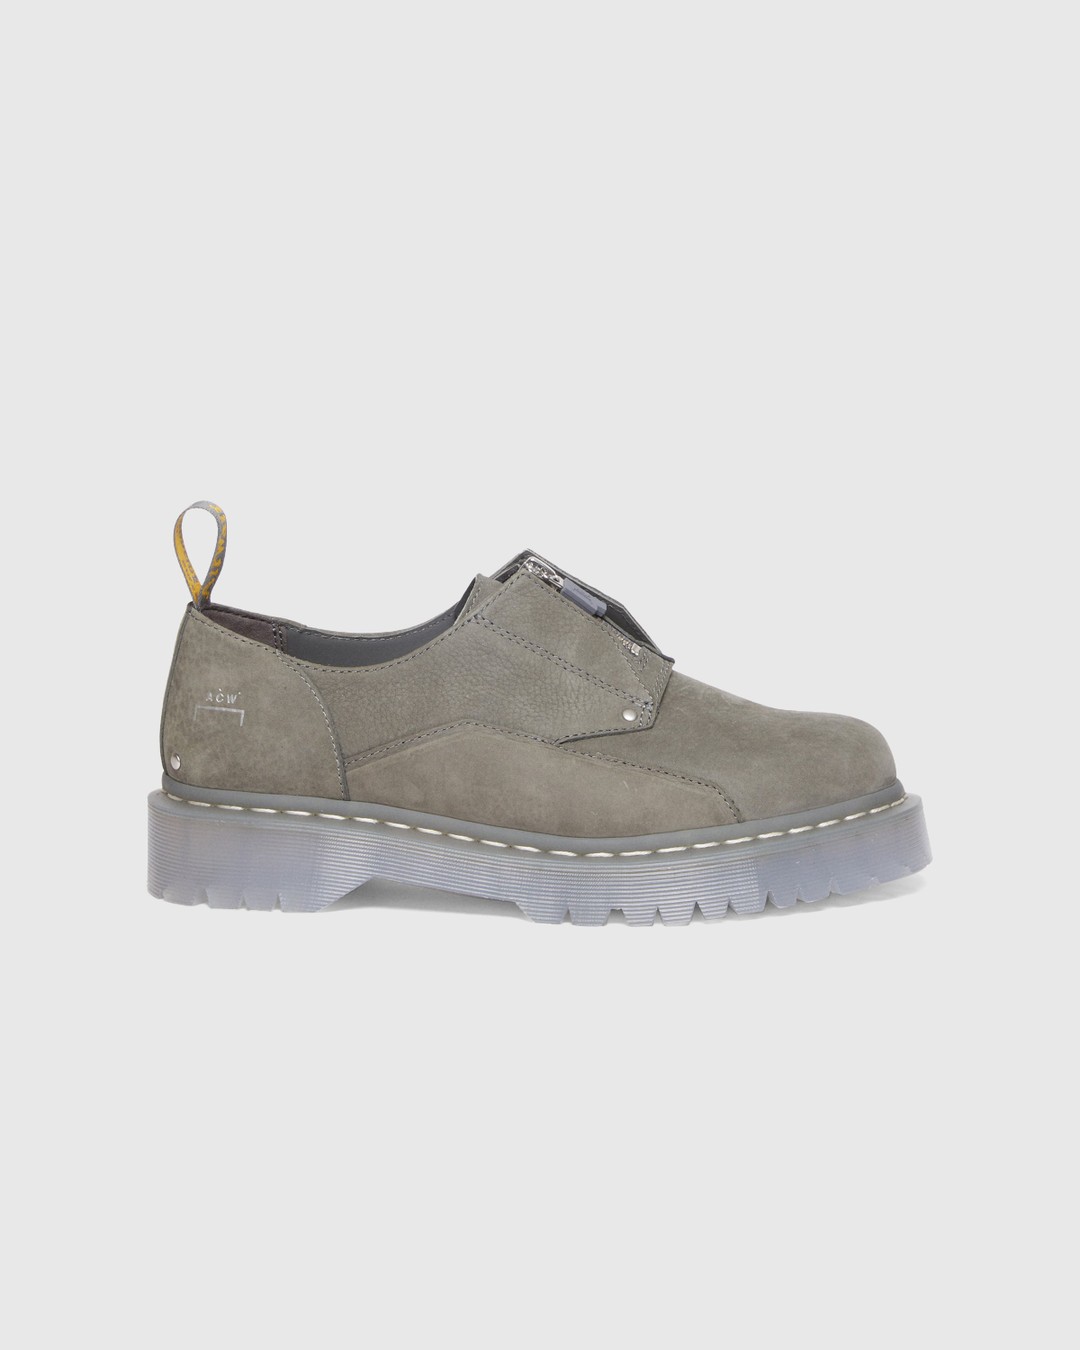 A-Cold-Wall* x Dr. Martens – 1461 BEX Low Mid Grey - Shoes - Grey - Image 1